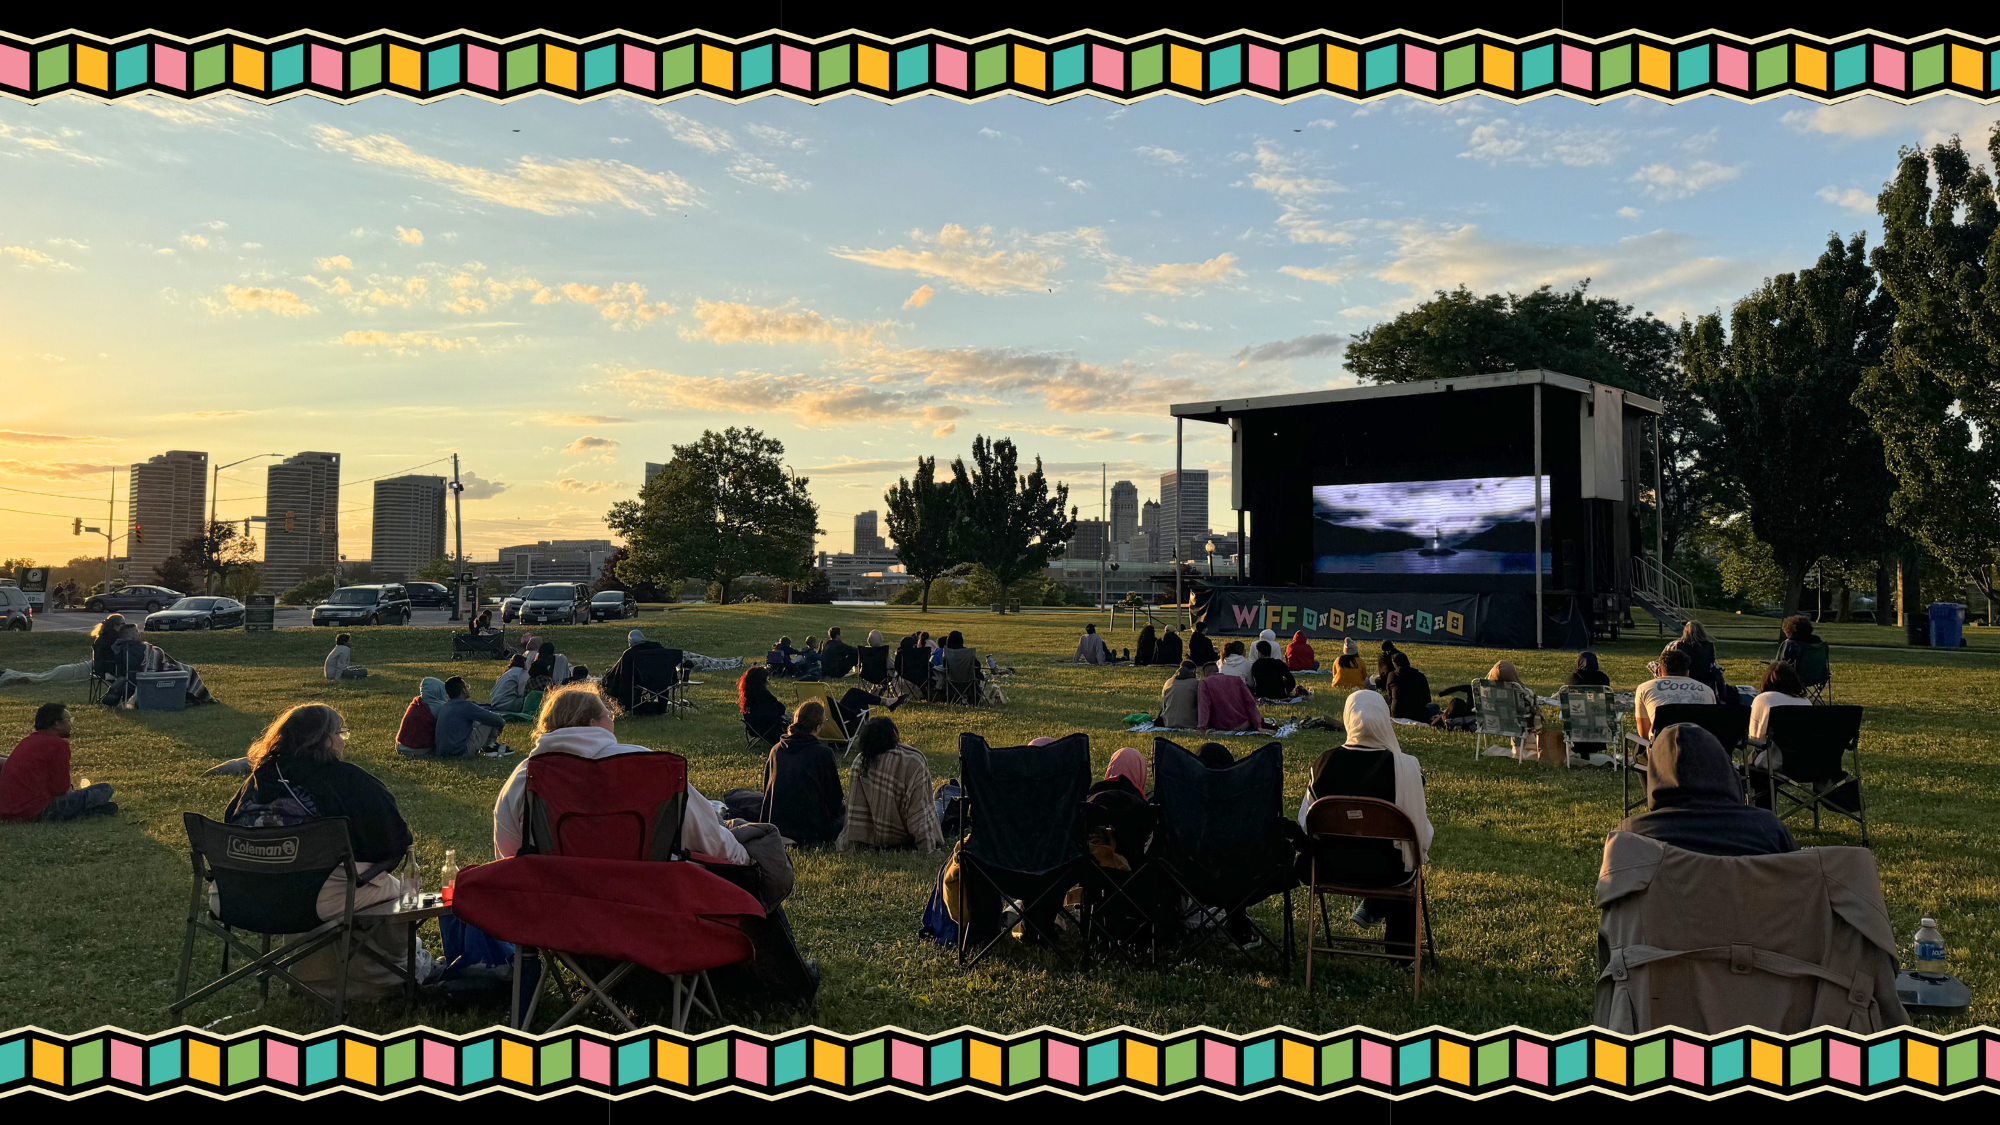 WIFF Under the Stars: A Successful Weekend of Free Outdoor Community Screenings